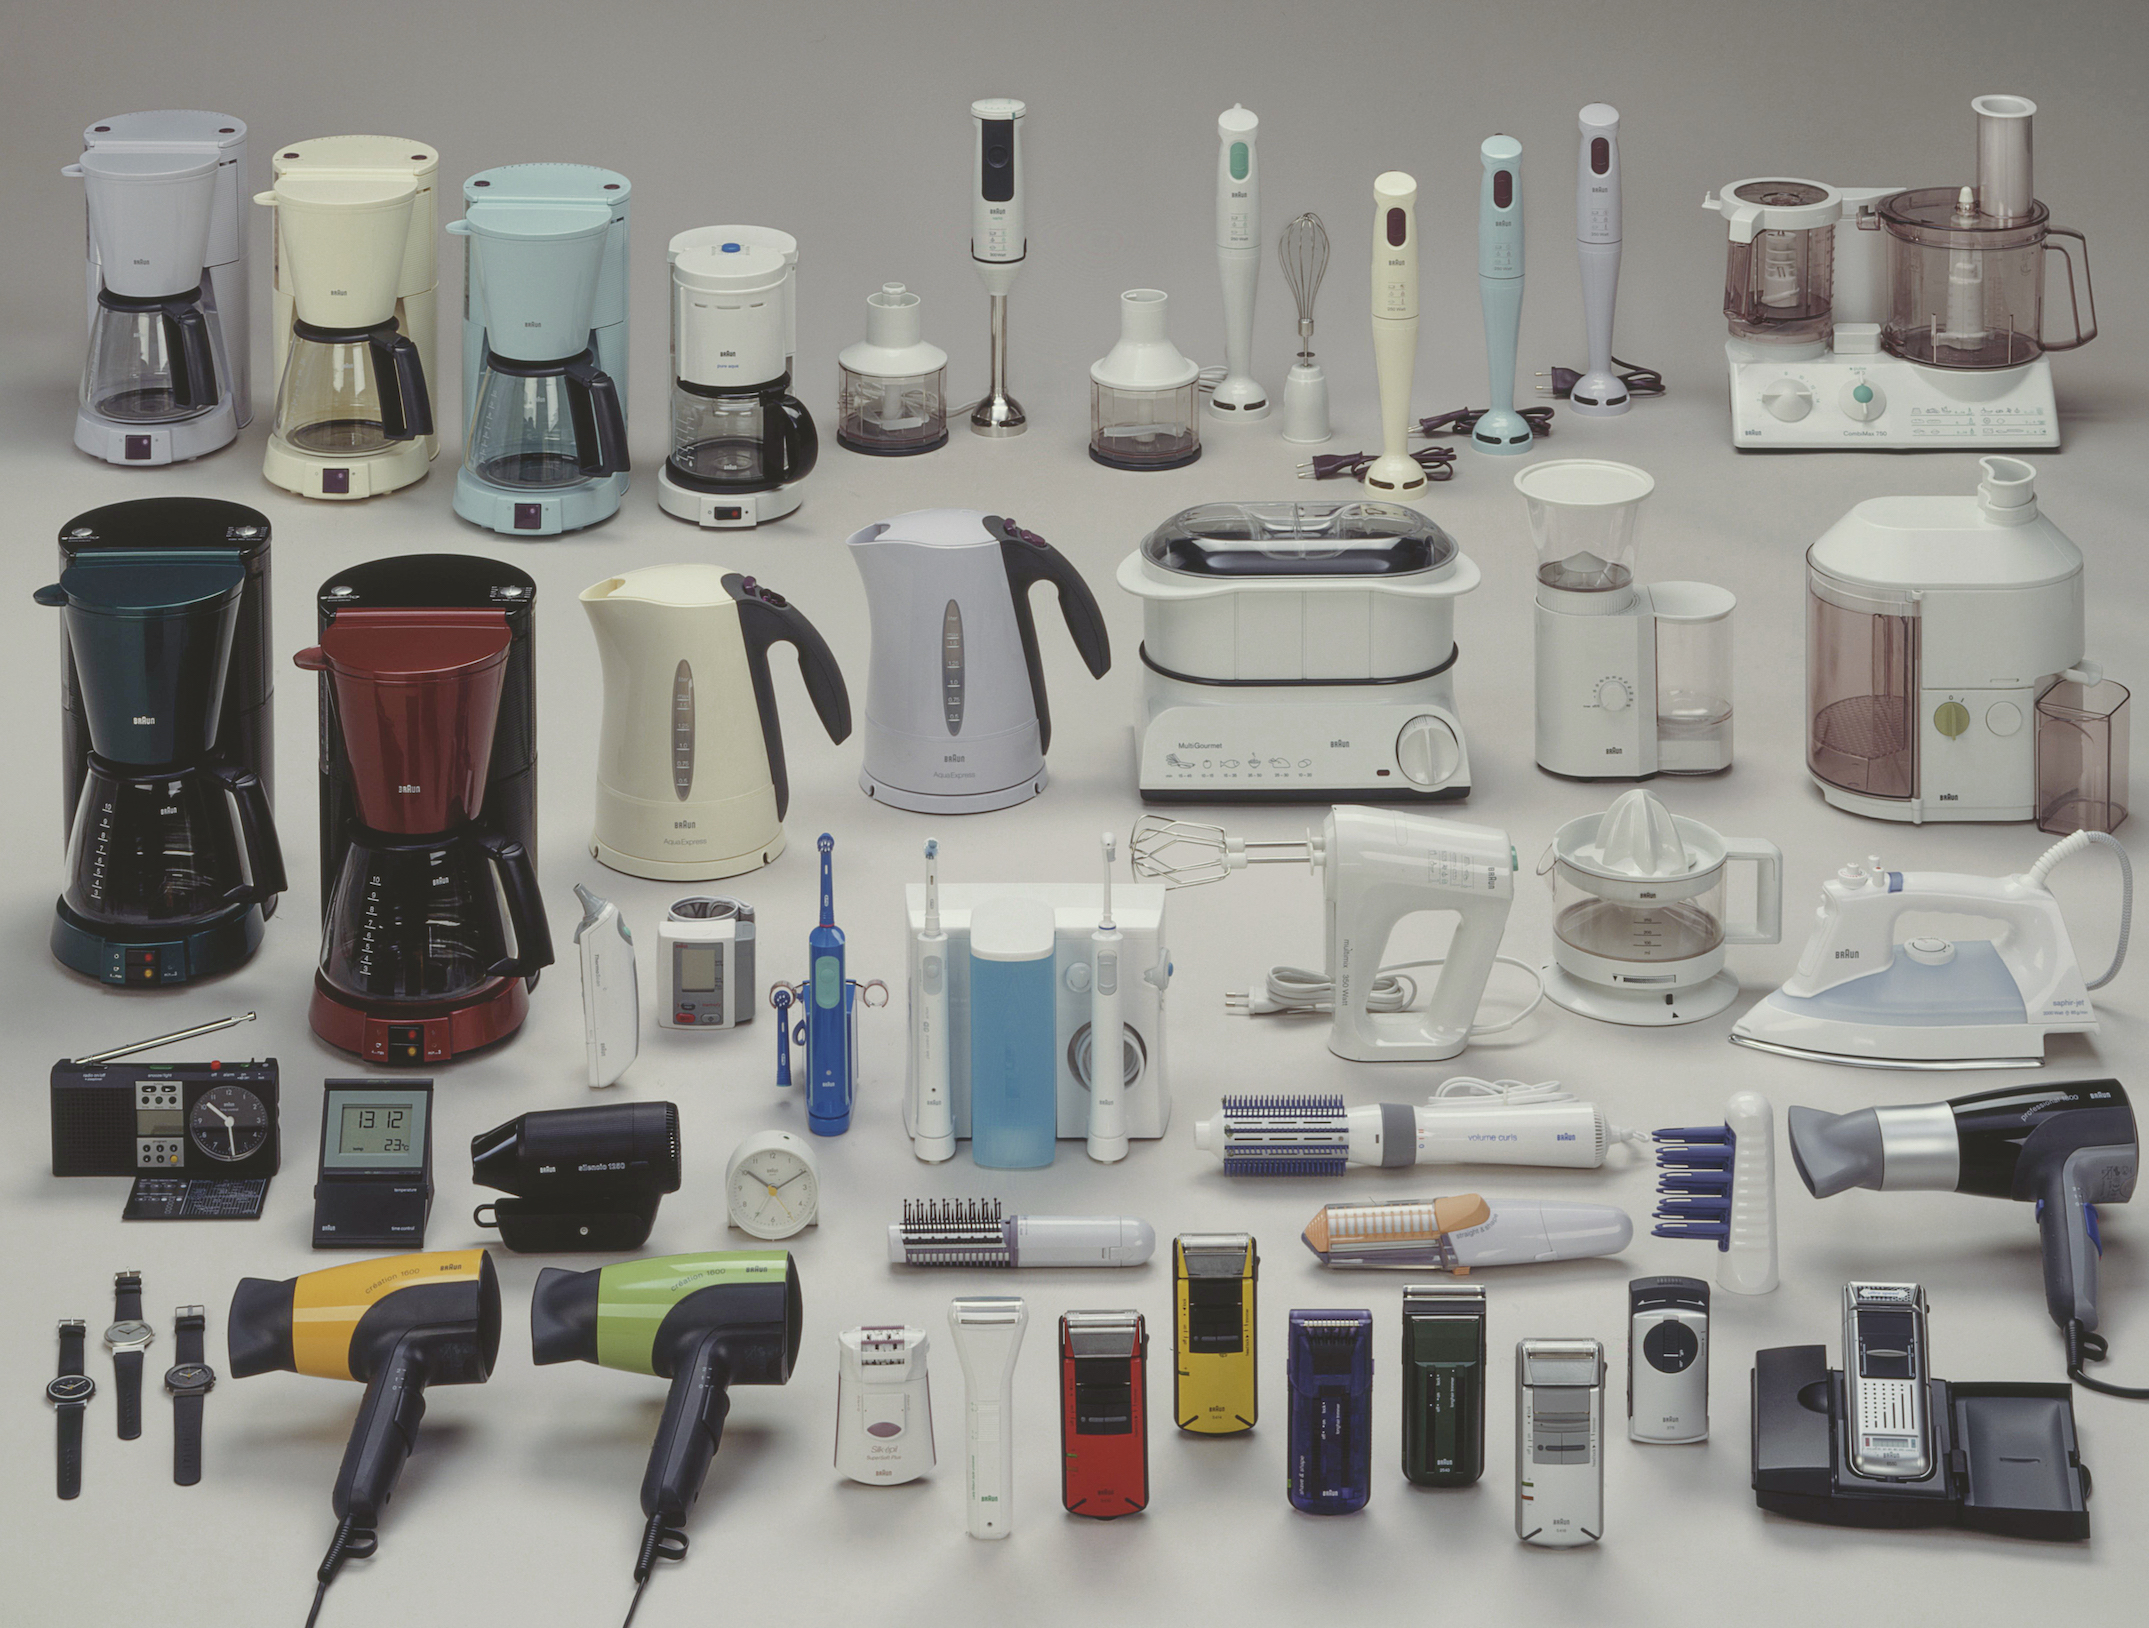 Braun products, from blenders to hair dryers, laid out across a plain light gray background